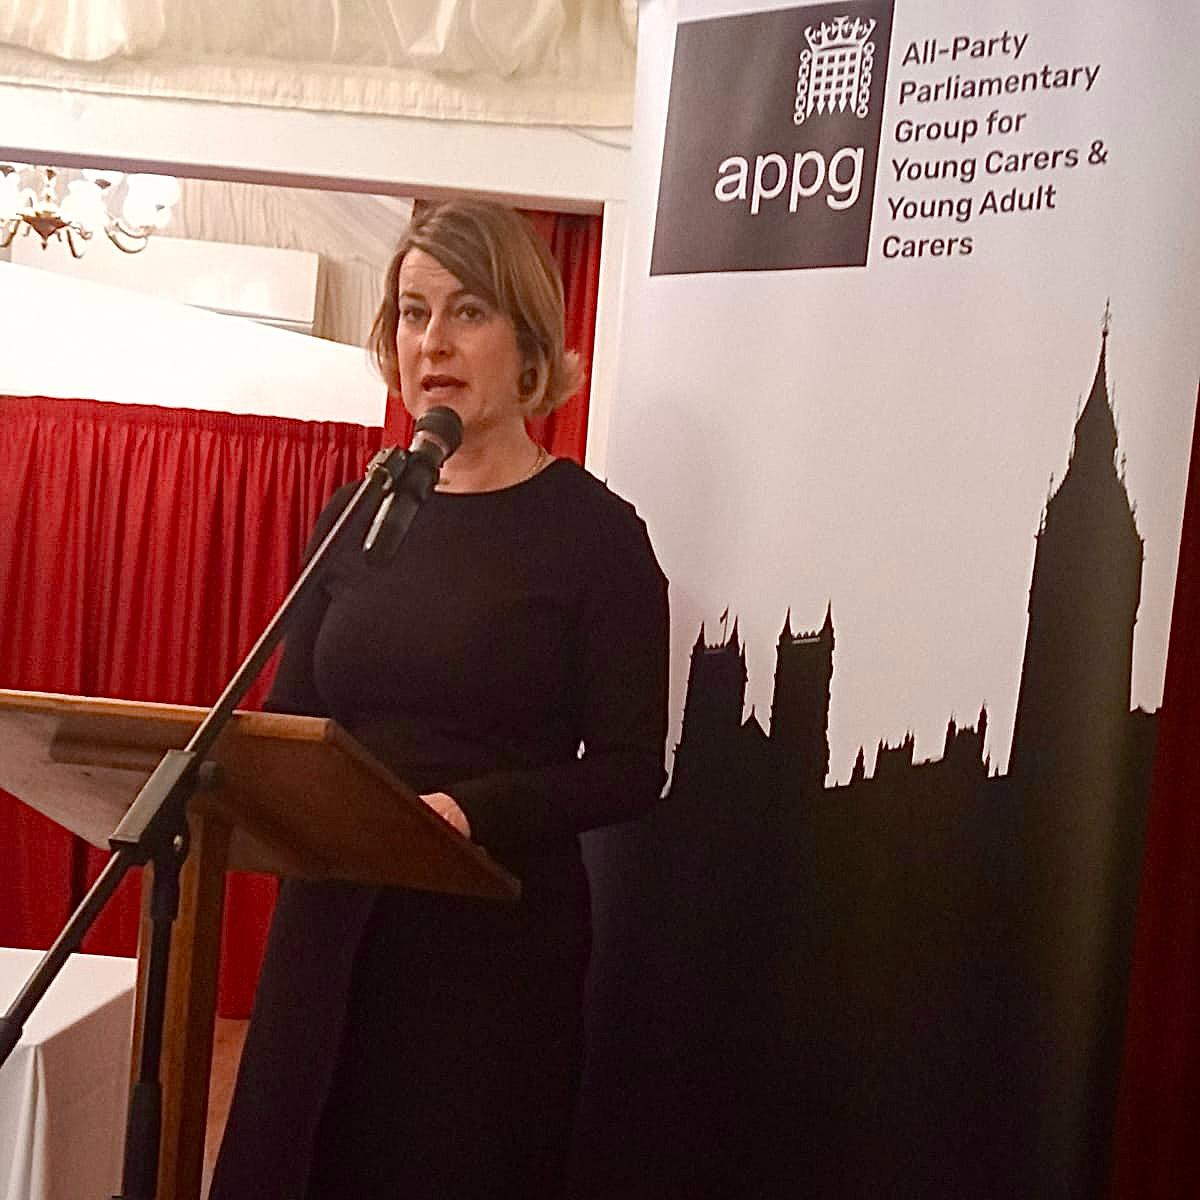 Helen Hayes MP, Shadow Minister for Children and Early Years, highlighted the importance of Carers Trust's research at the launch of APPG Inquiry on Young Carers and Young Adult Carers, and the urgent need for more support for young carers Inquiry report: carers.org/APPGinquiry